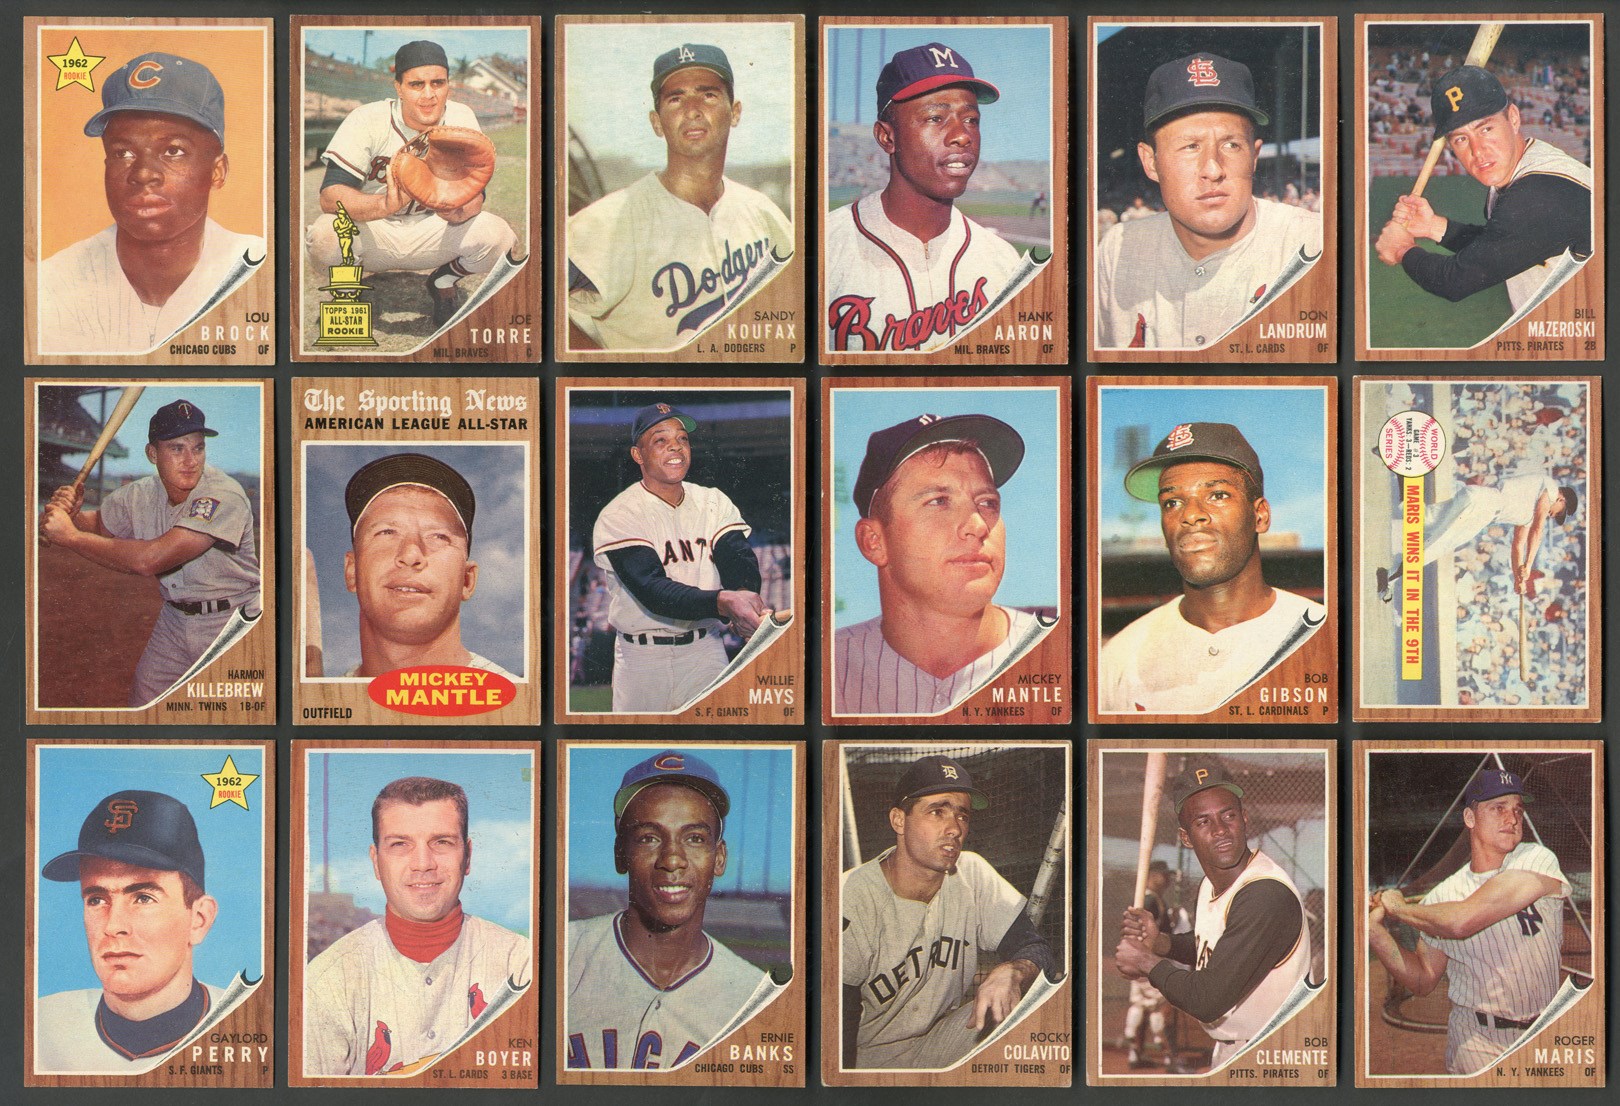 Baseball and Trading Cards - 1962 Topps Baseball Complete Master Set with all Green Tint, Pose and Emblem Variations - Total of 692 Cards